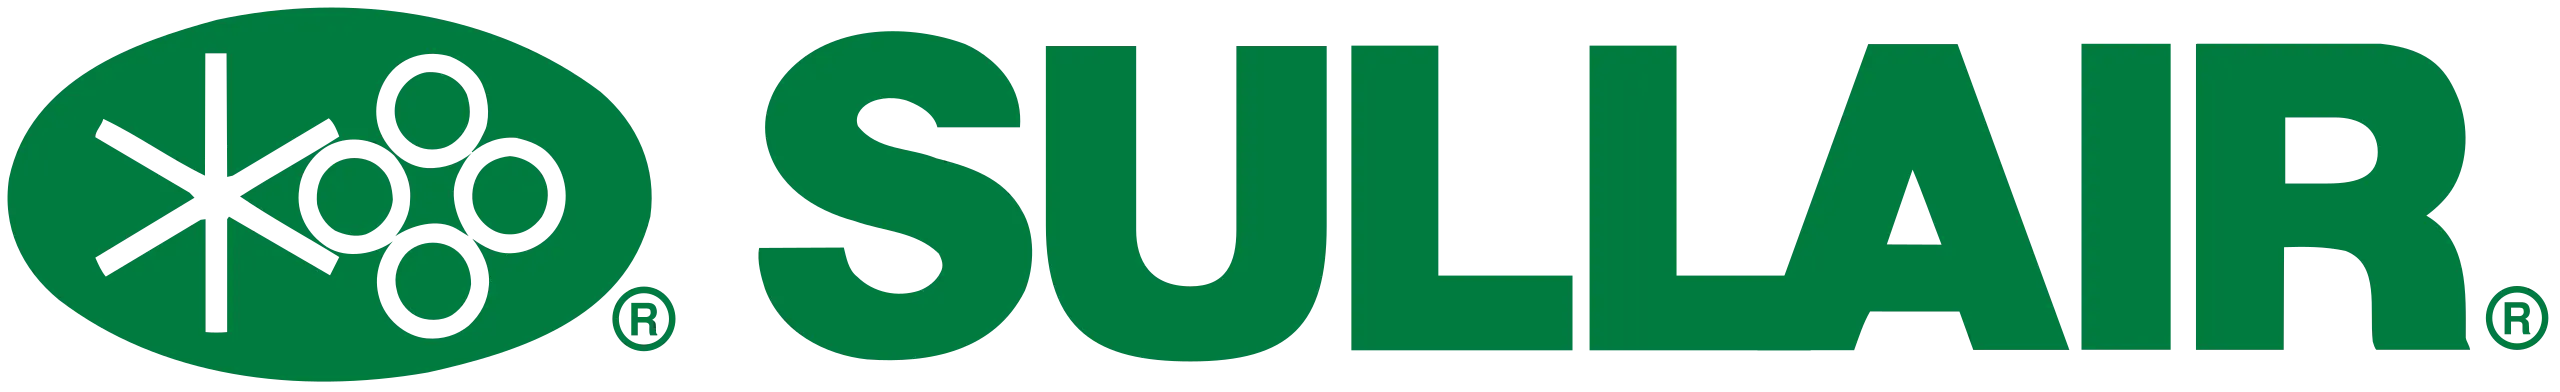 The logo of Sullair Australia, a business that Set Point Services has worked with.